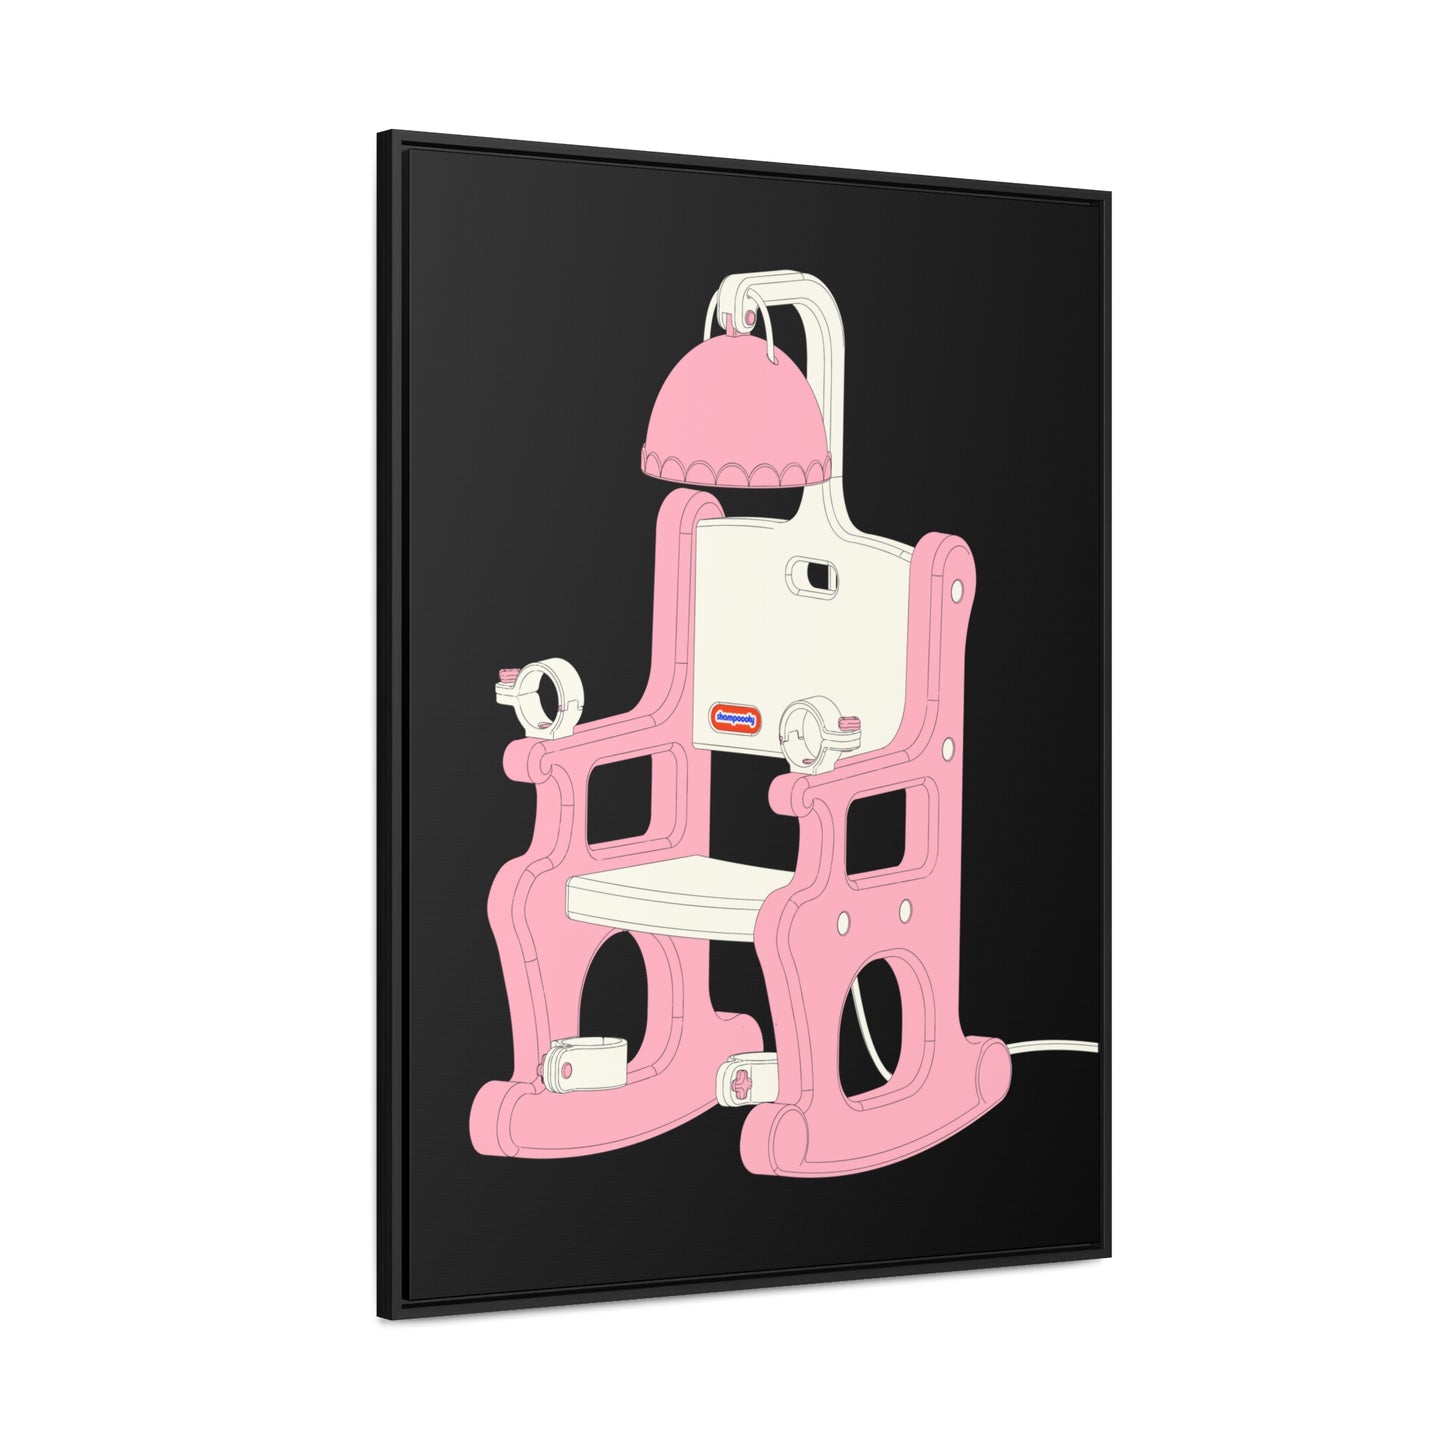 Electric Chair Illustrated Framed Gallery Wrap (Black)